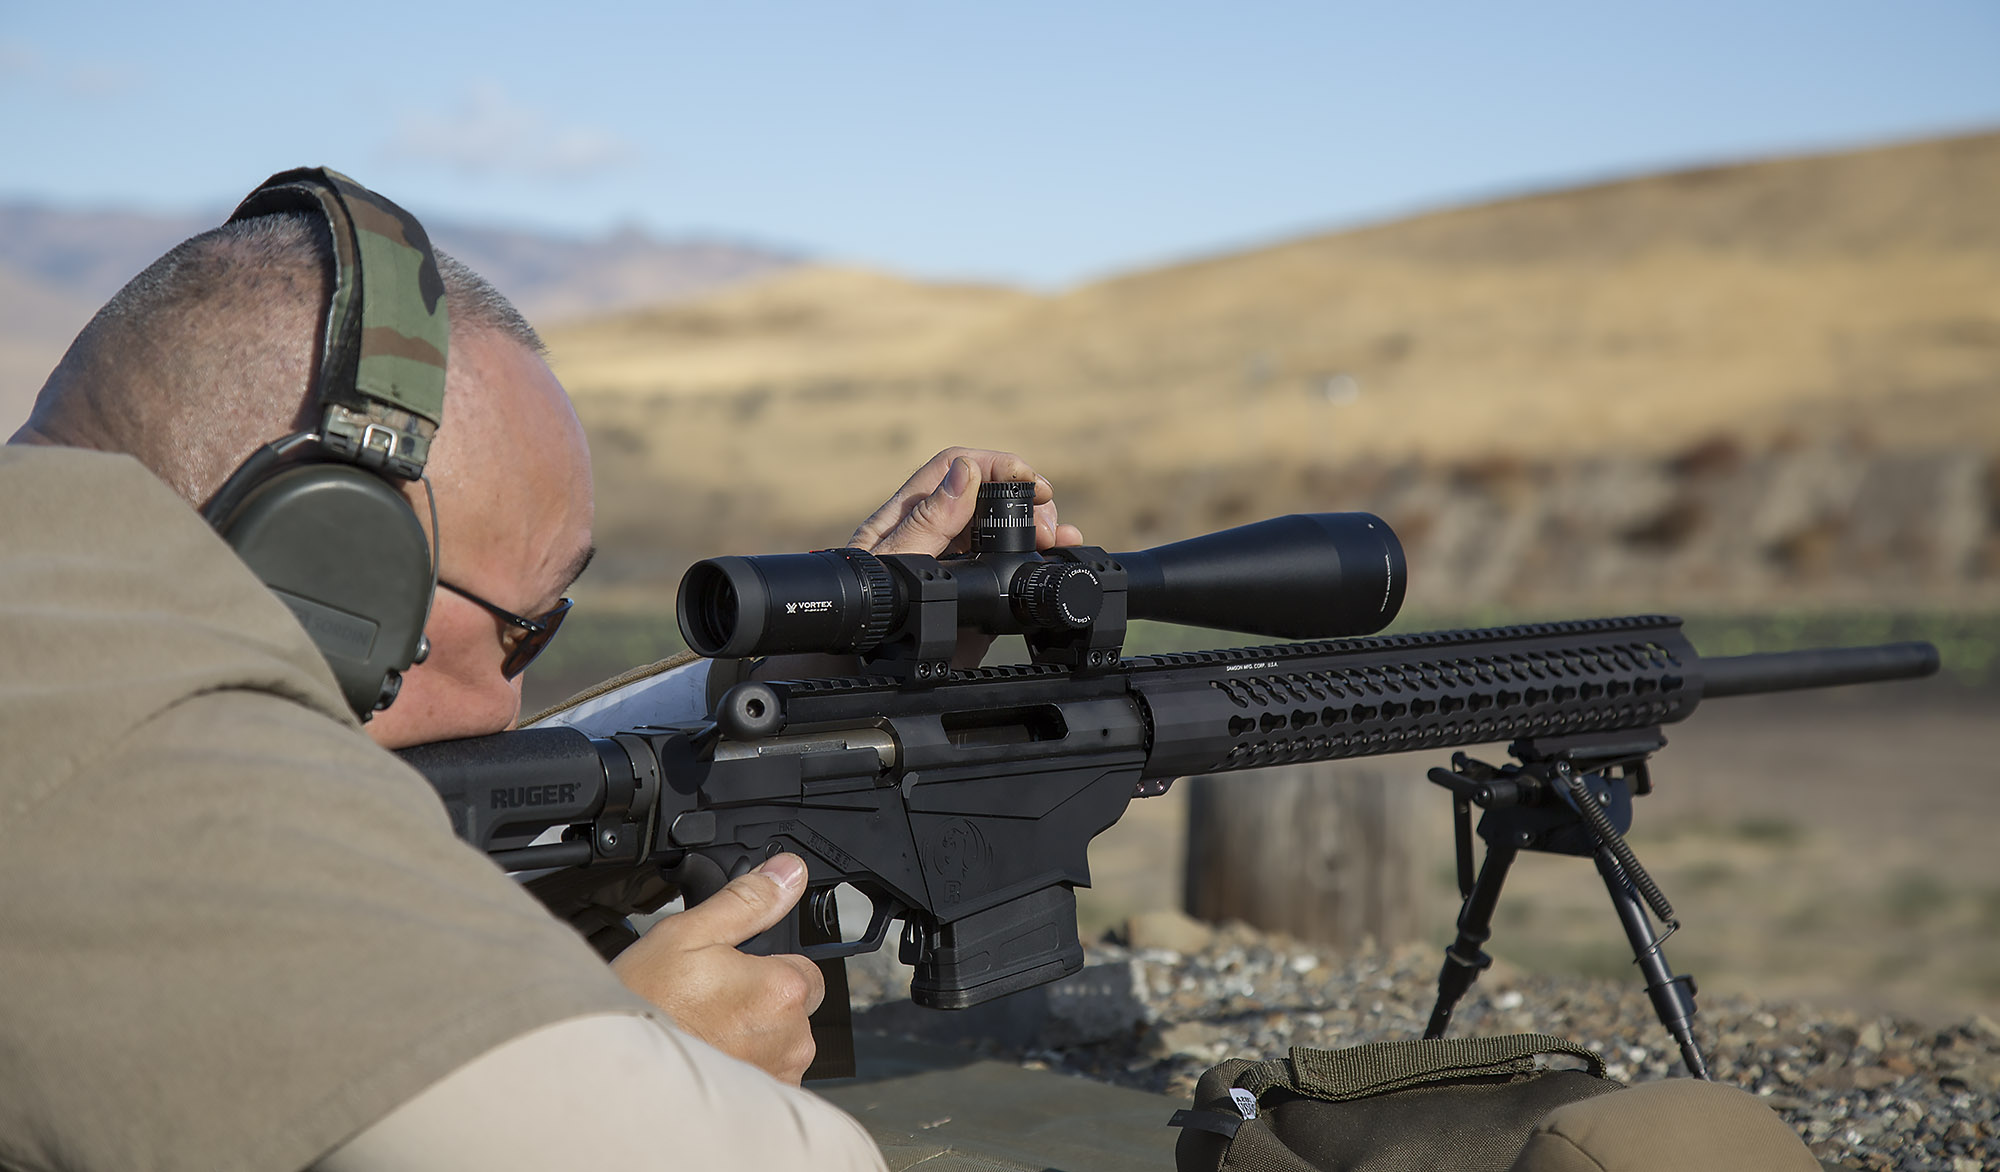 Ruger Precision Rifle Part 4: First 100 Yard Groups and Deer Hunting.